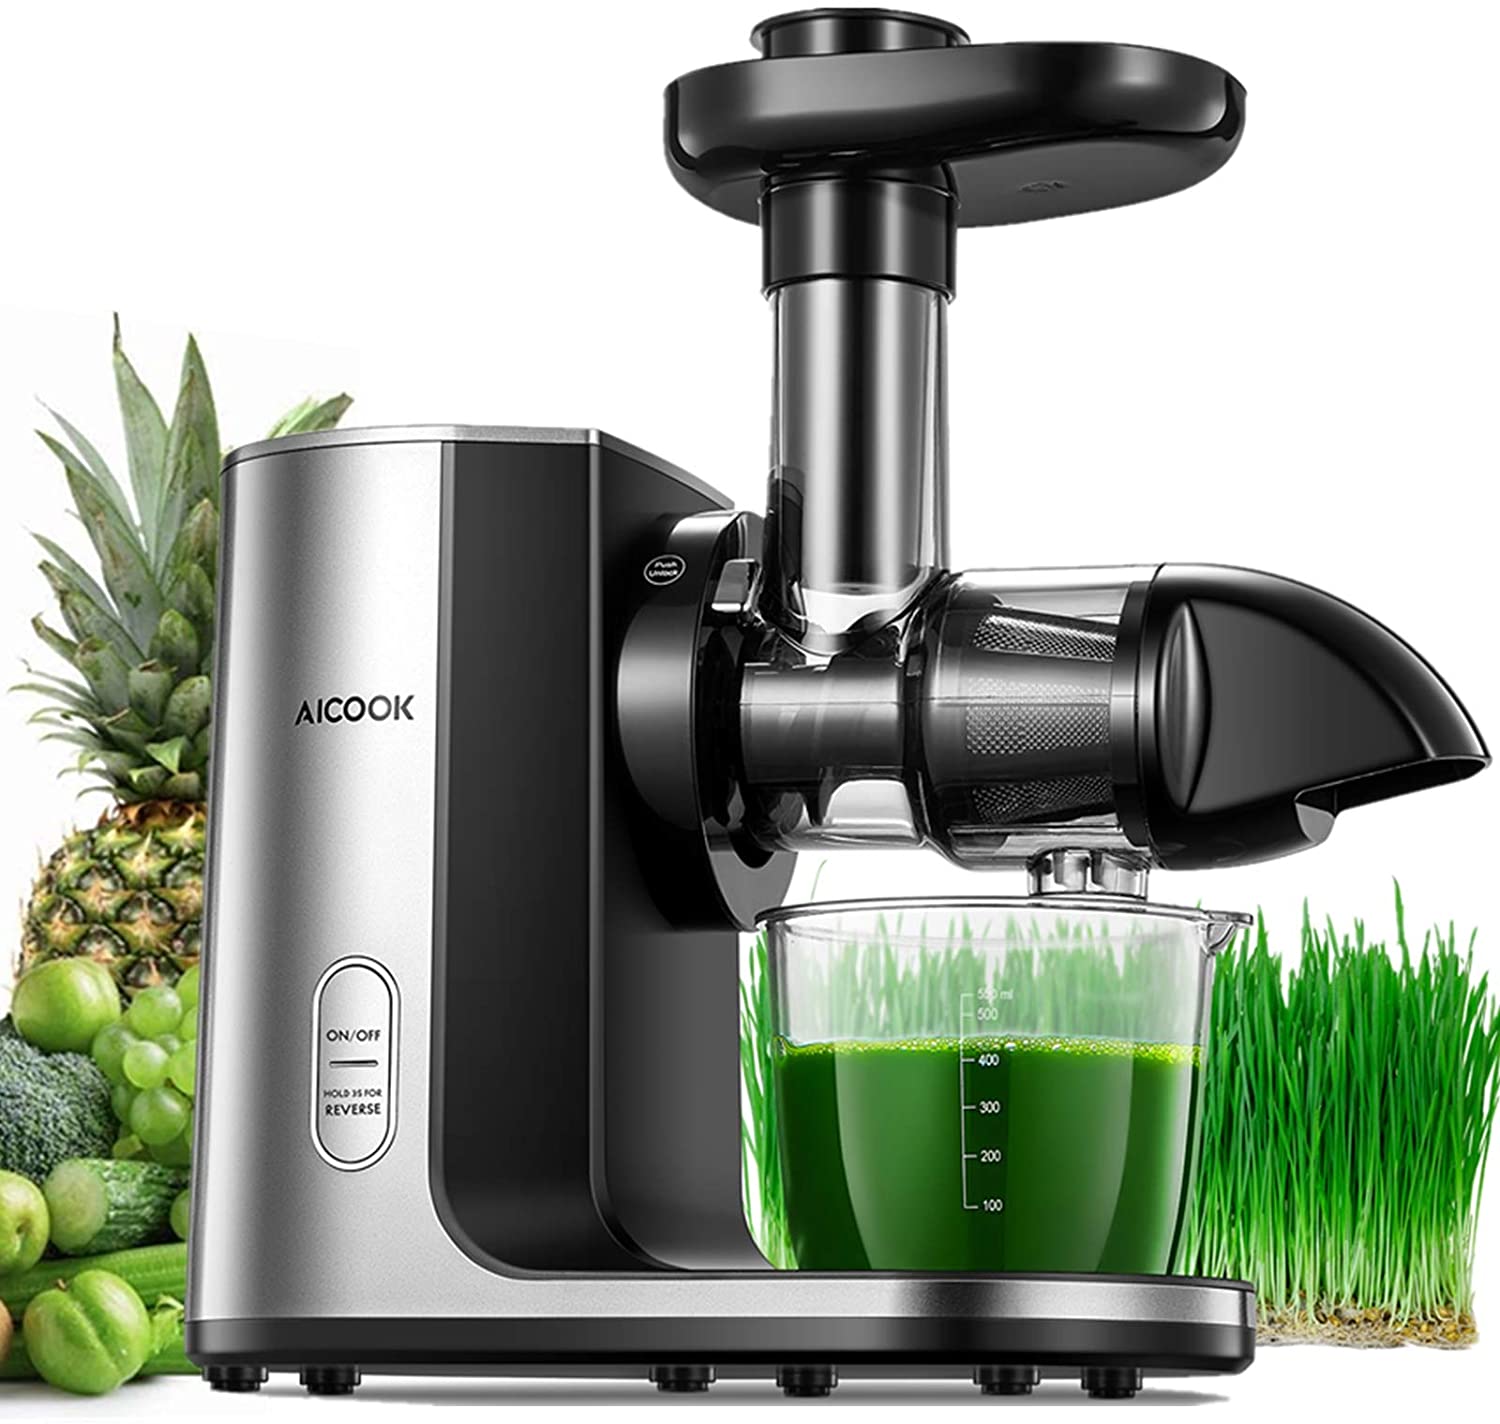 Aicok Slow Masticating Juicer Extractor Easy to Clean Juice Recipes for Vegetables and Fruits BPA-Free Galaxy Gray Cold Press Juicer with Brush Renewed Quiet Motor & Reverse Function Juicer Machines 